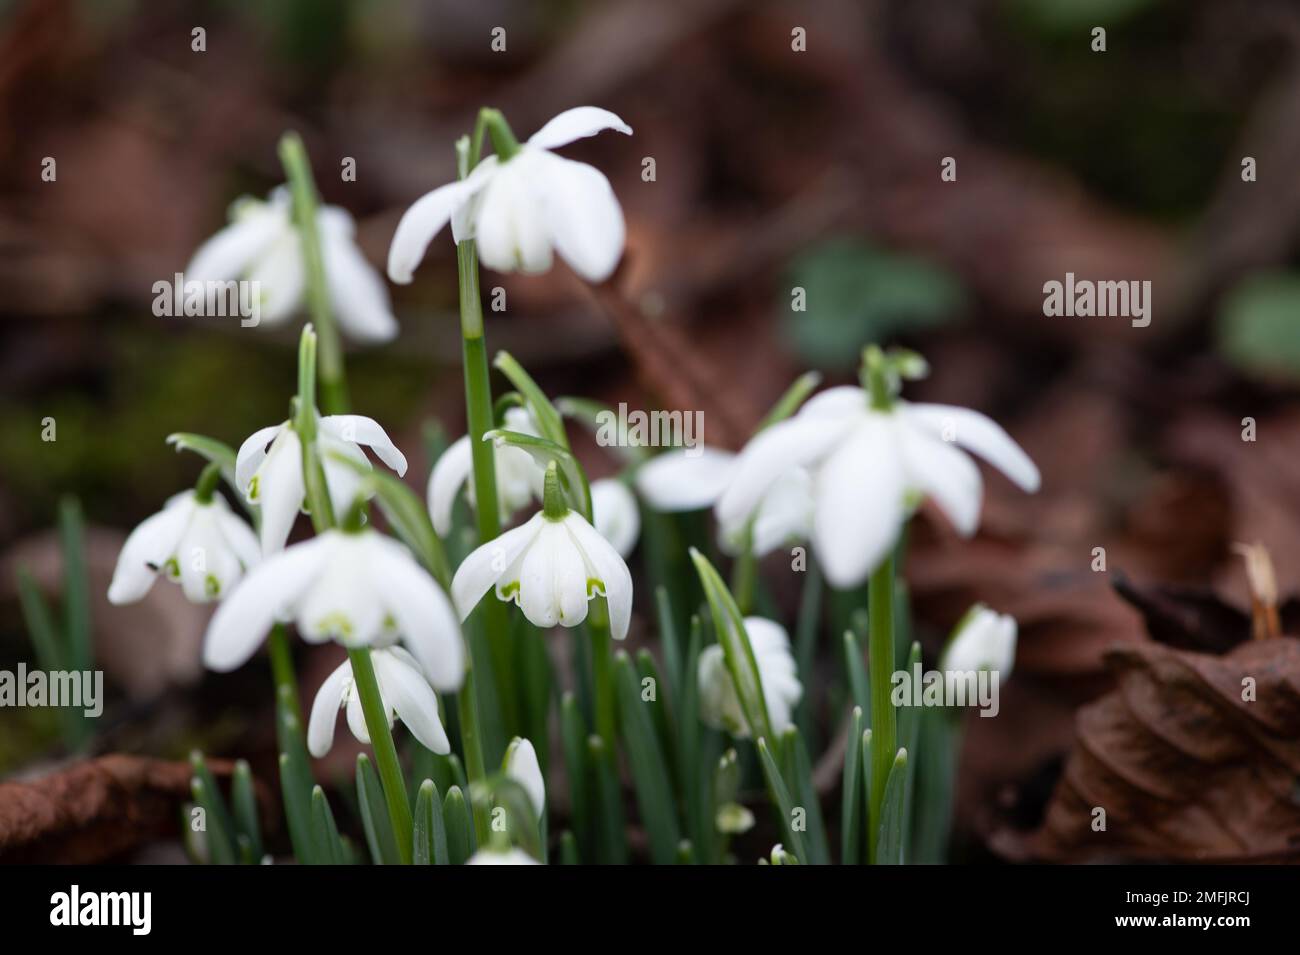 Dorney, Buckinghamshire, UK. 9th February, 2022. Galanthus, pretty snowdrops scatter a woodland in Dorney, Buckinghamshire. There are around 20 known species of snowdrops in Europe. Credit: Maureen McLean/Alamy Stock Photo